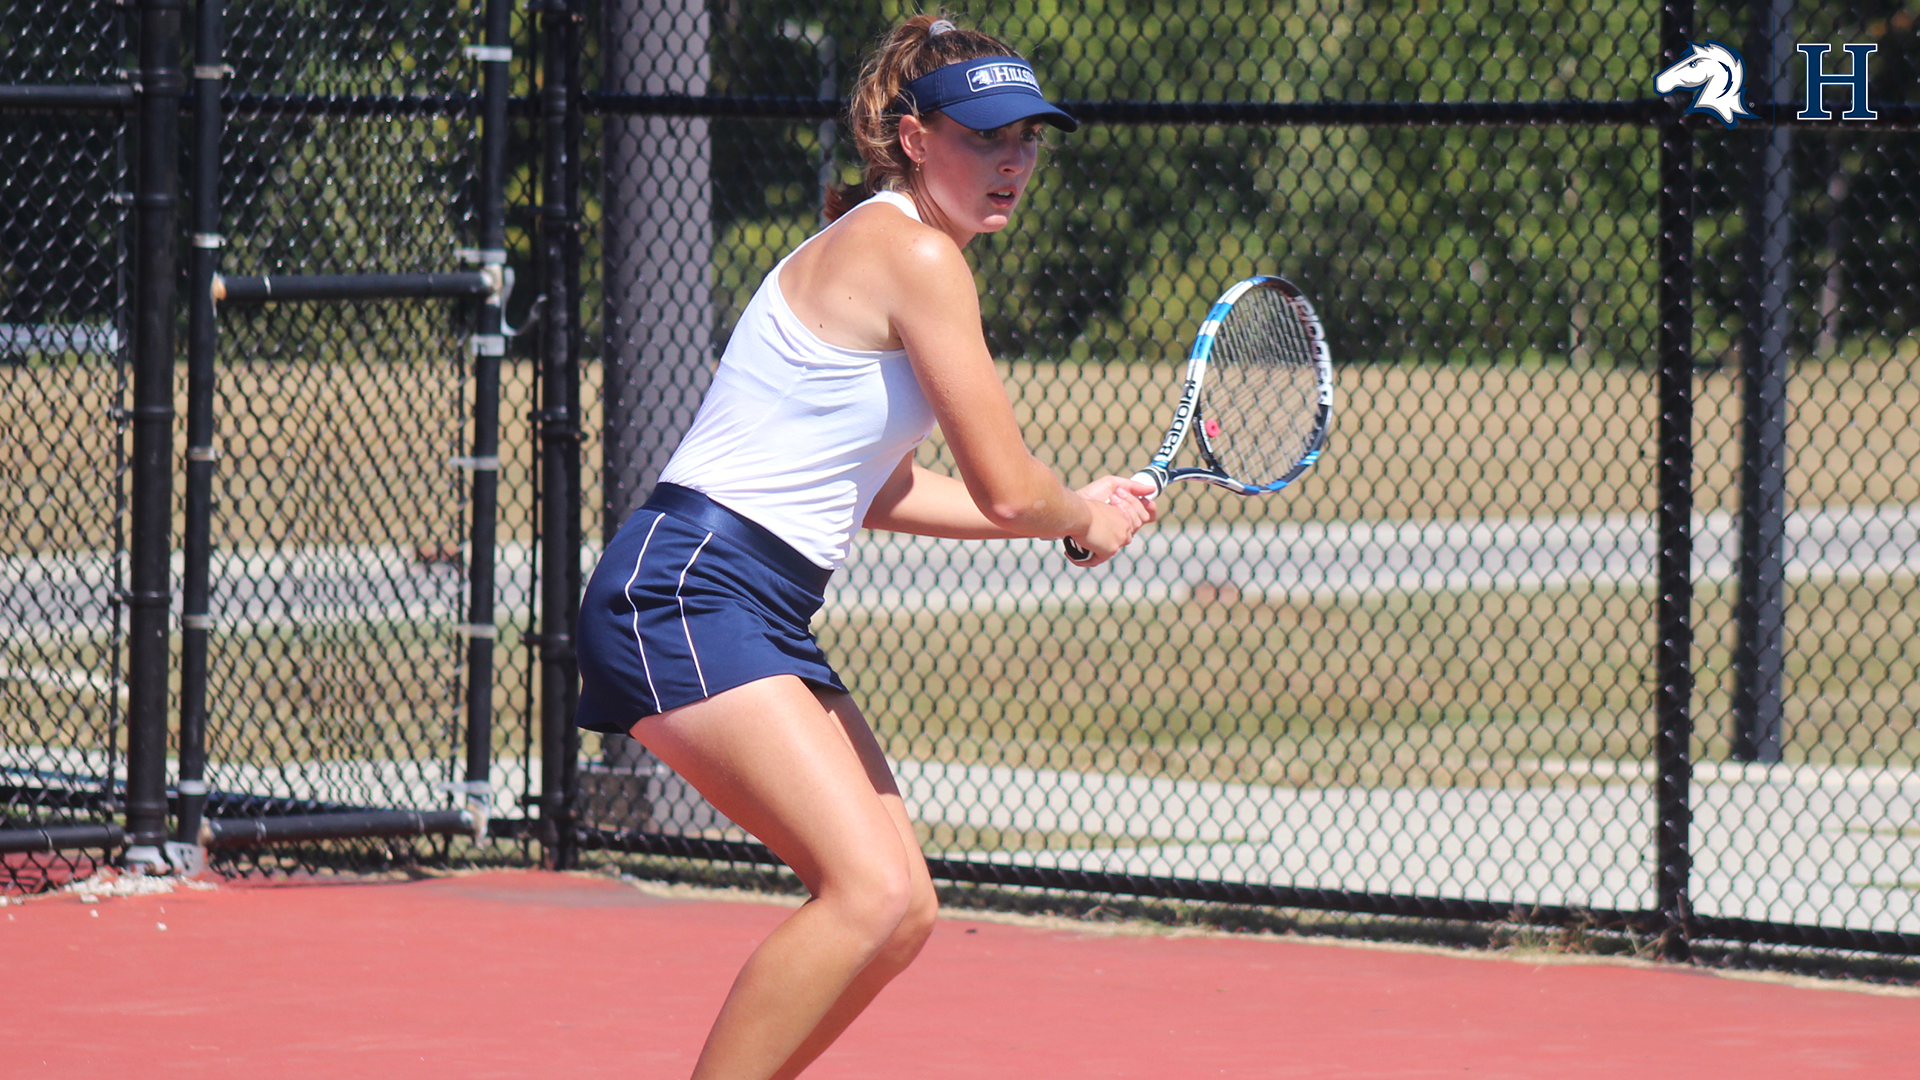 Charger women's tennis team tops Cedarville 4-0 for road win